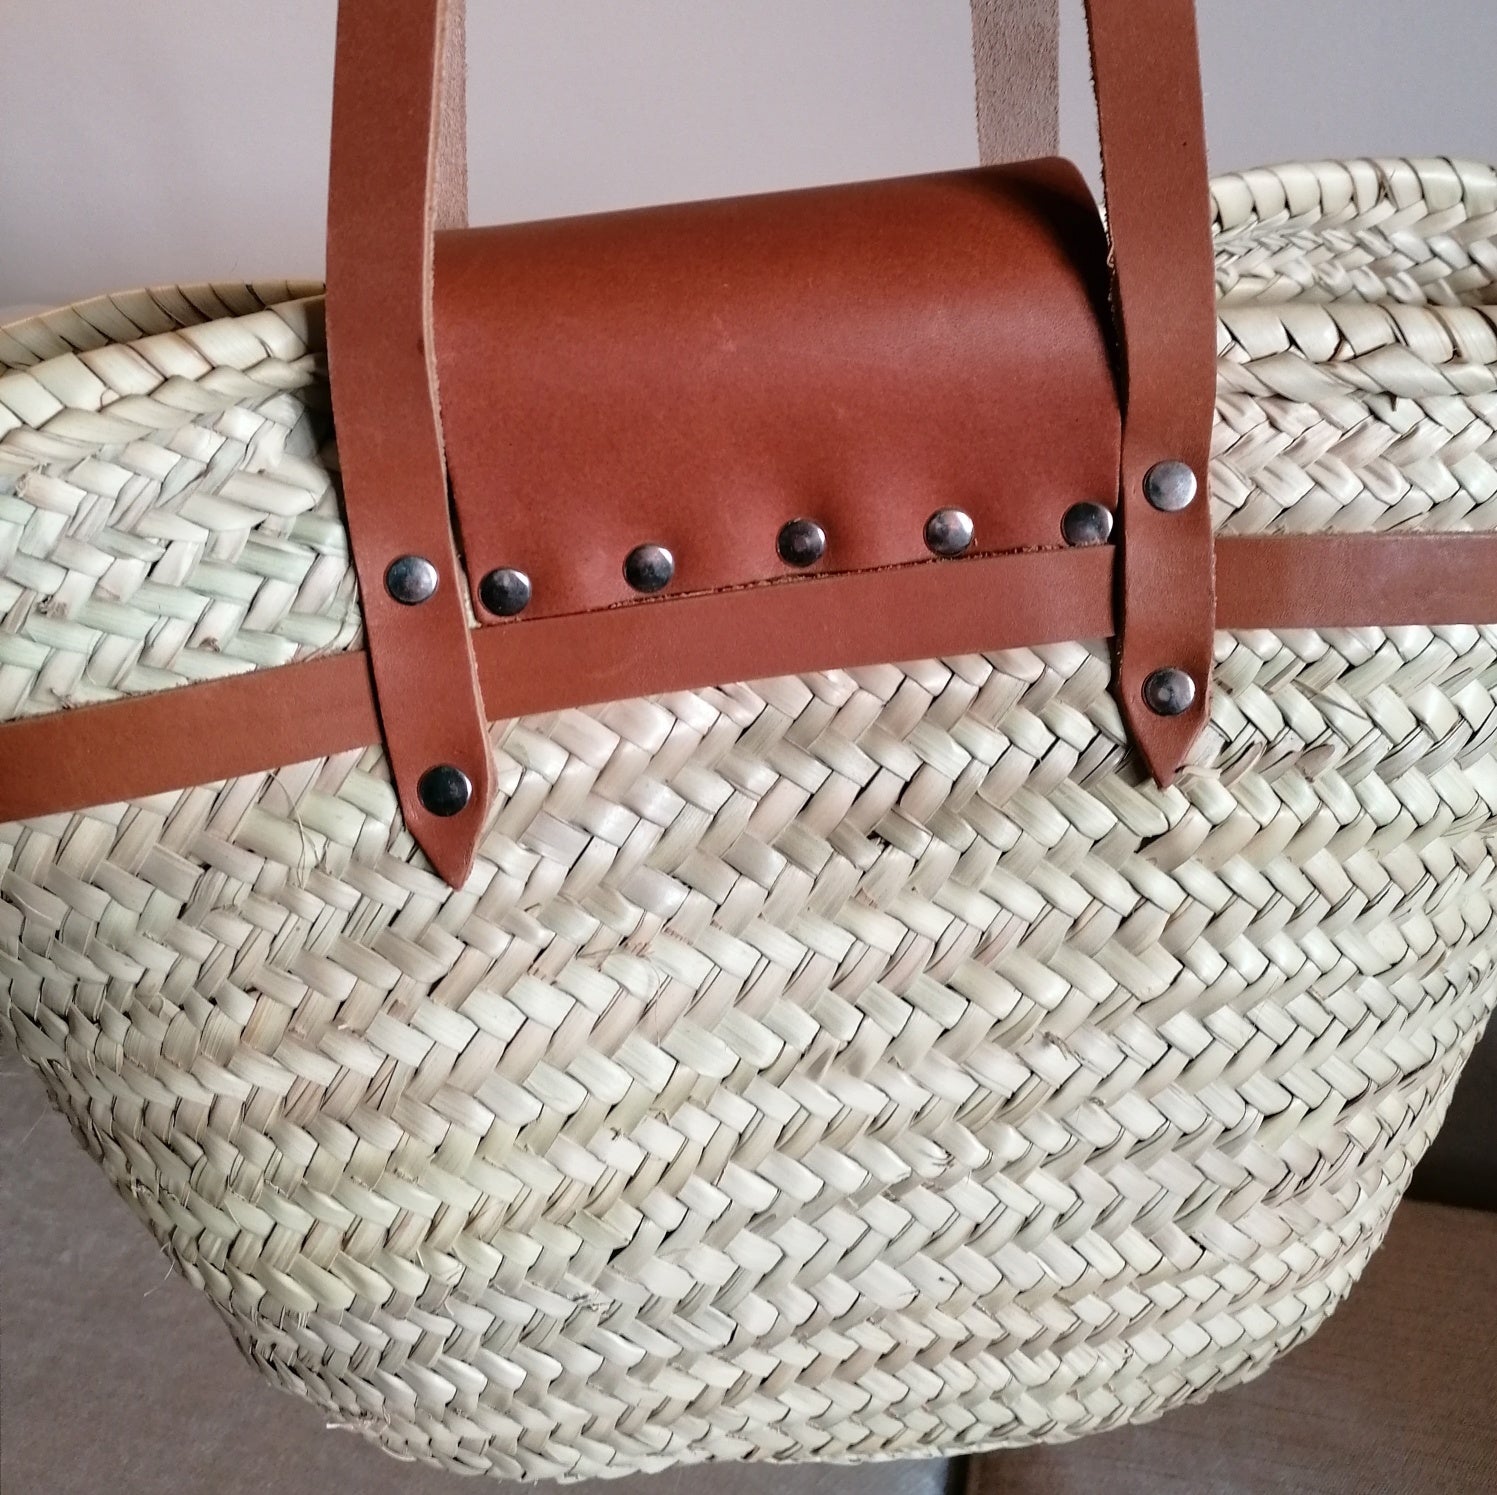 Luxury reed and leather French basket